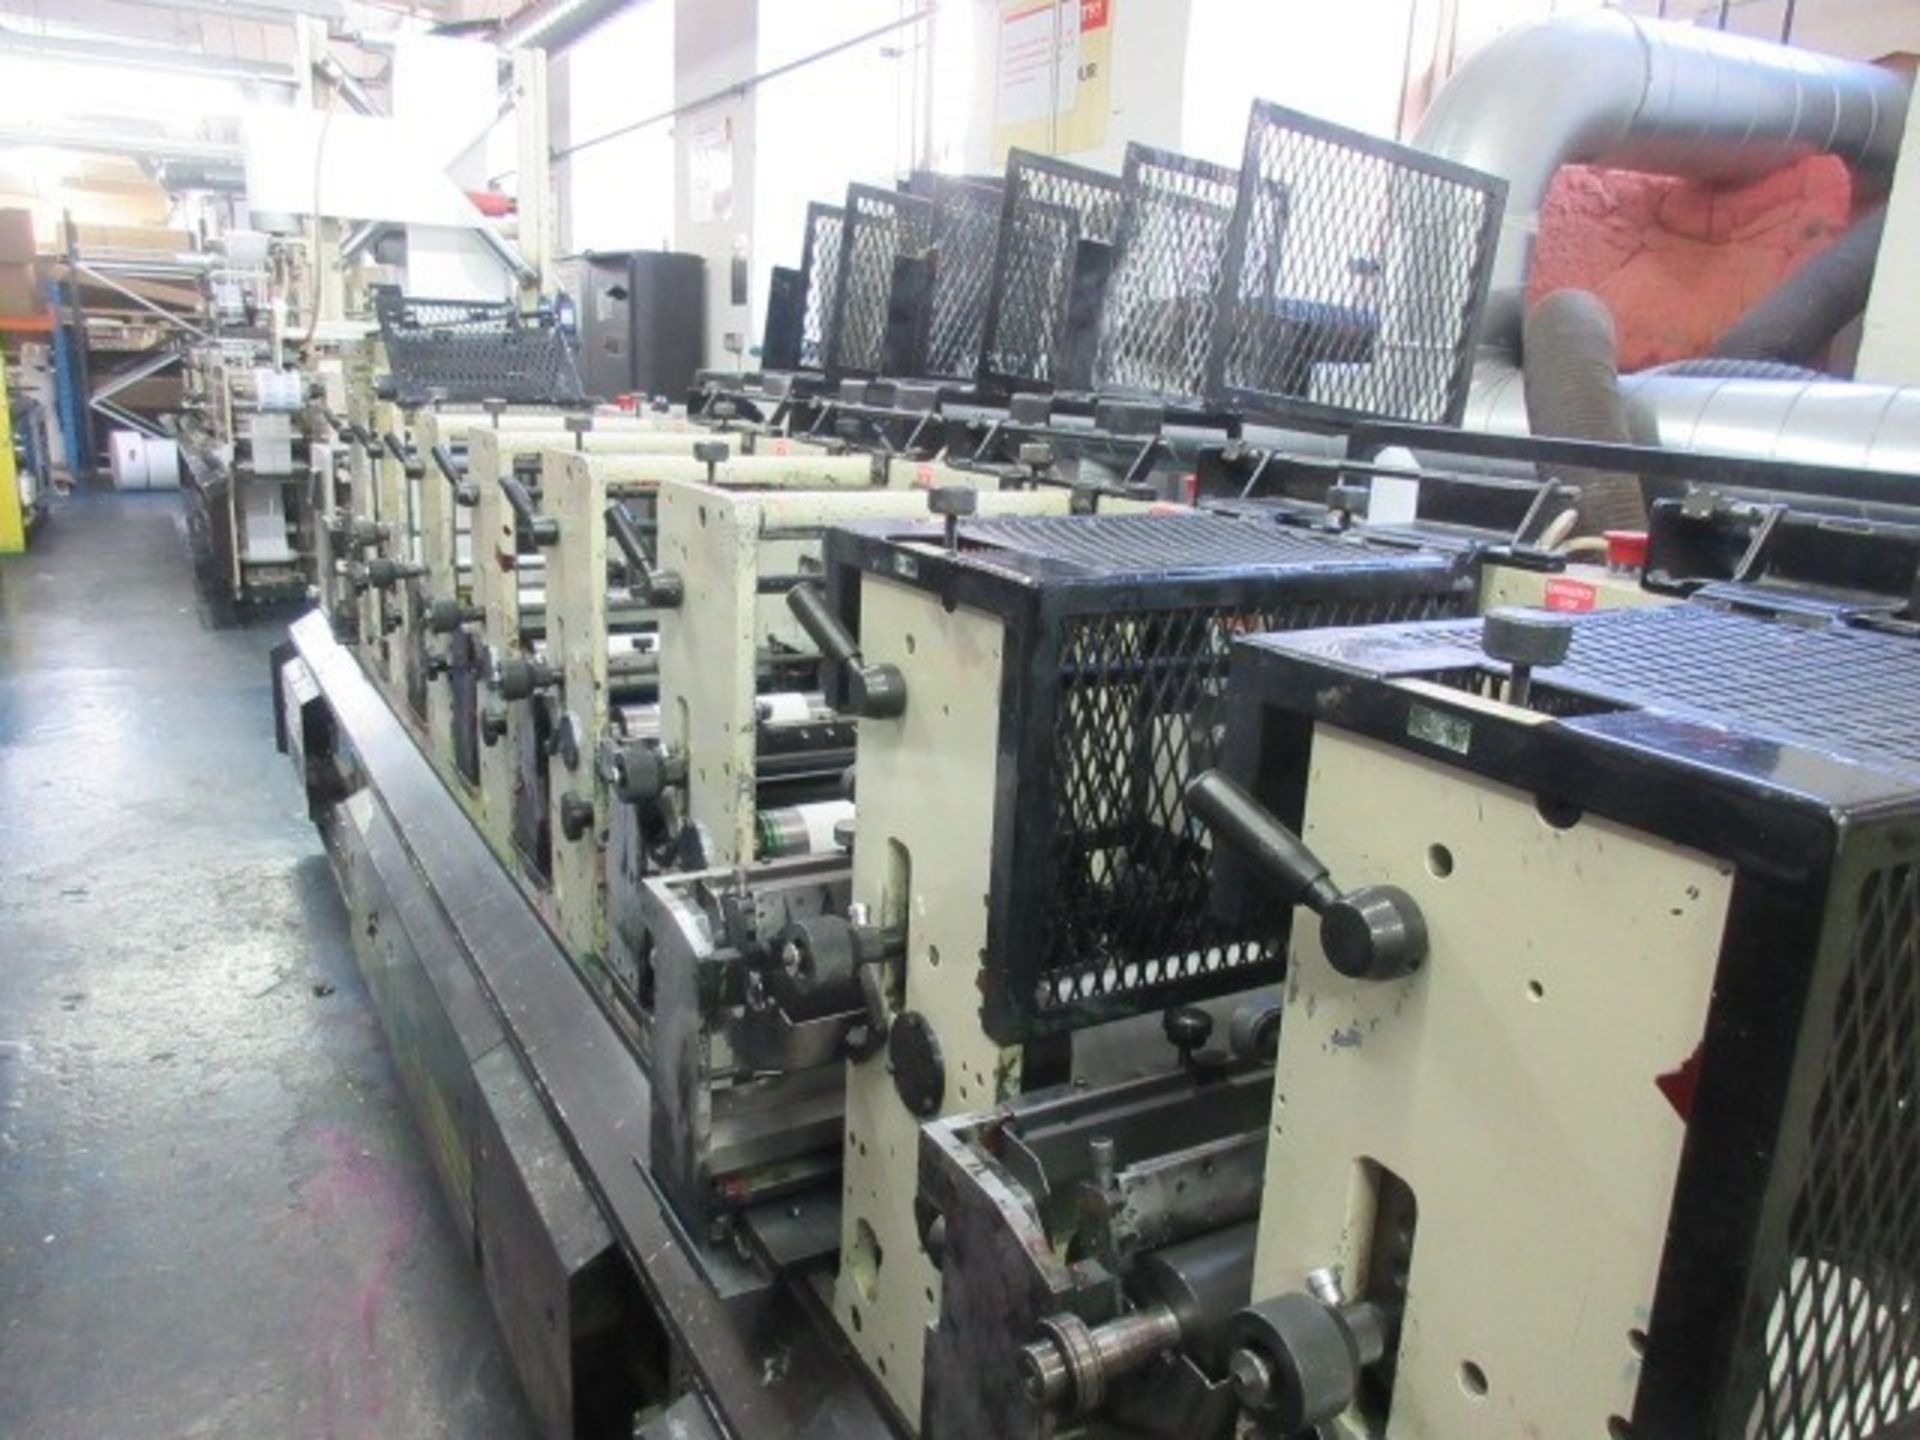 Mark Andy 2200-10F 10” 8 colour flexographic label printing press. Serial no: 1260086 (2002) - Image 372 of 383